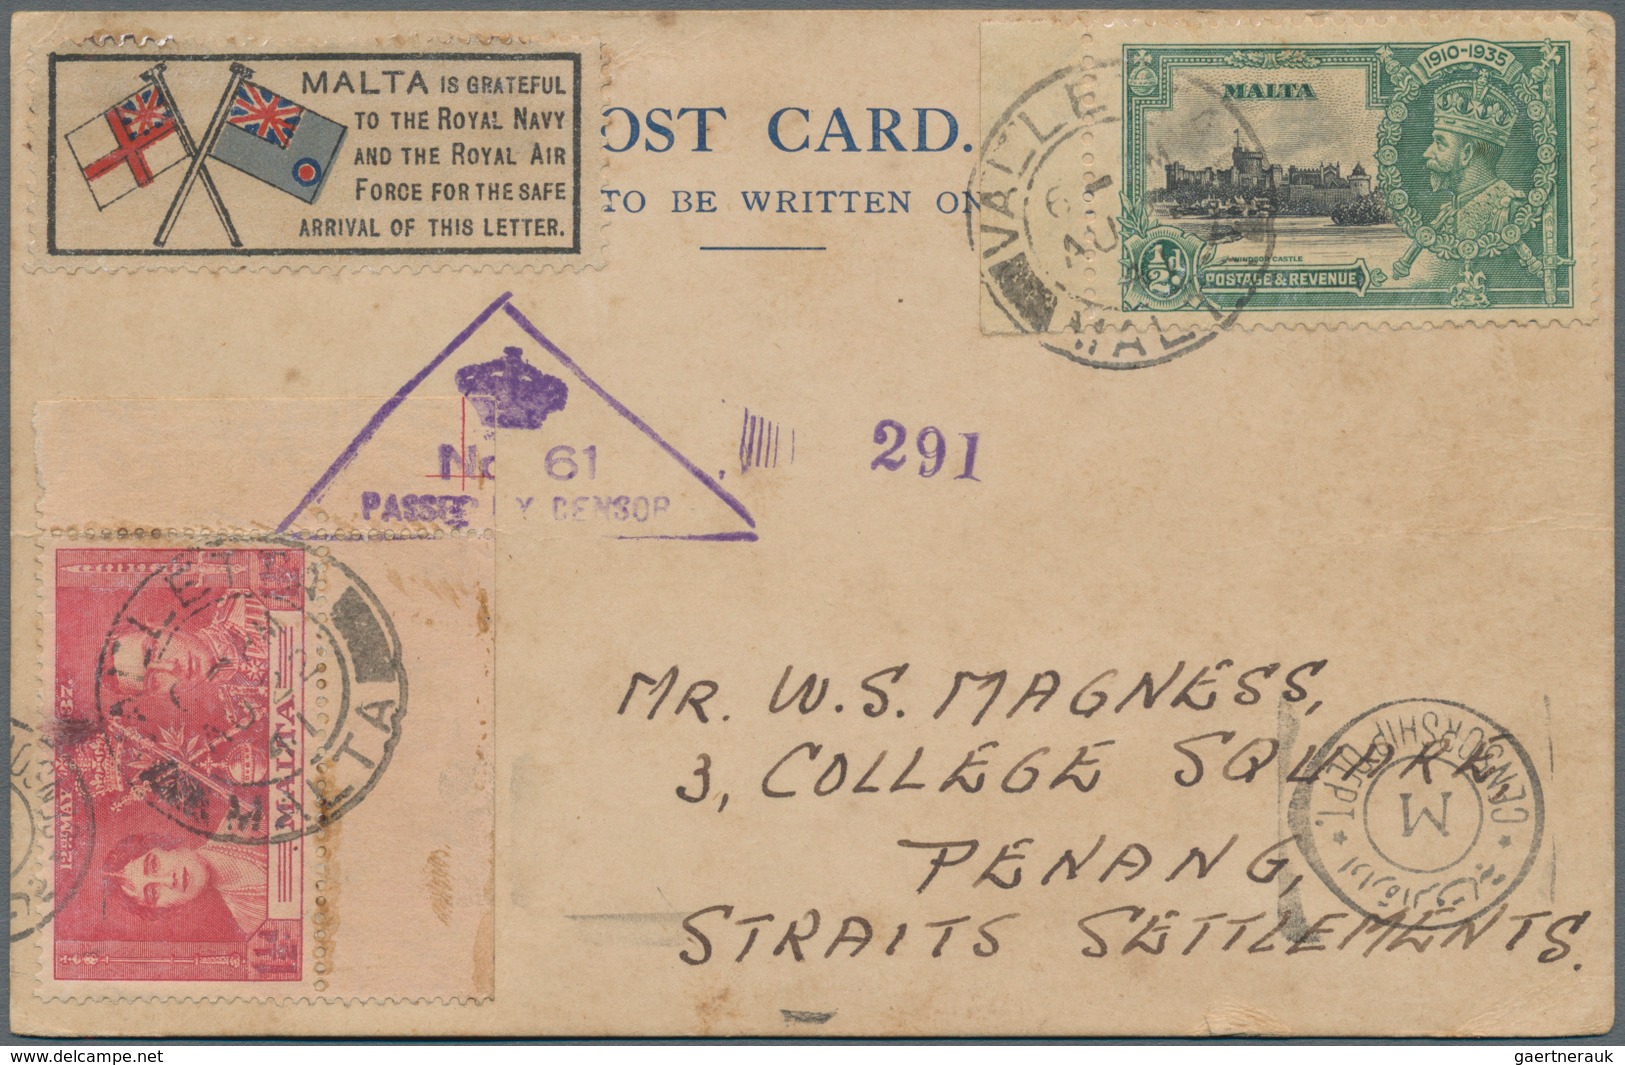 Malta: 1941 Postcard And A Cover Sent To PENANG, Straits Settlements, Both With Special "MALTA Is Gr - Malta